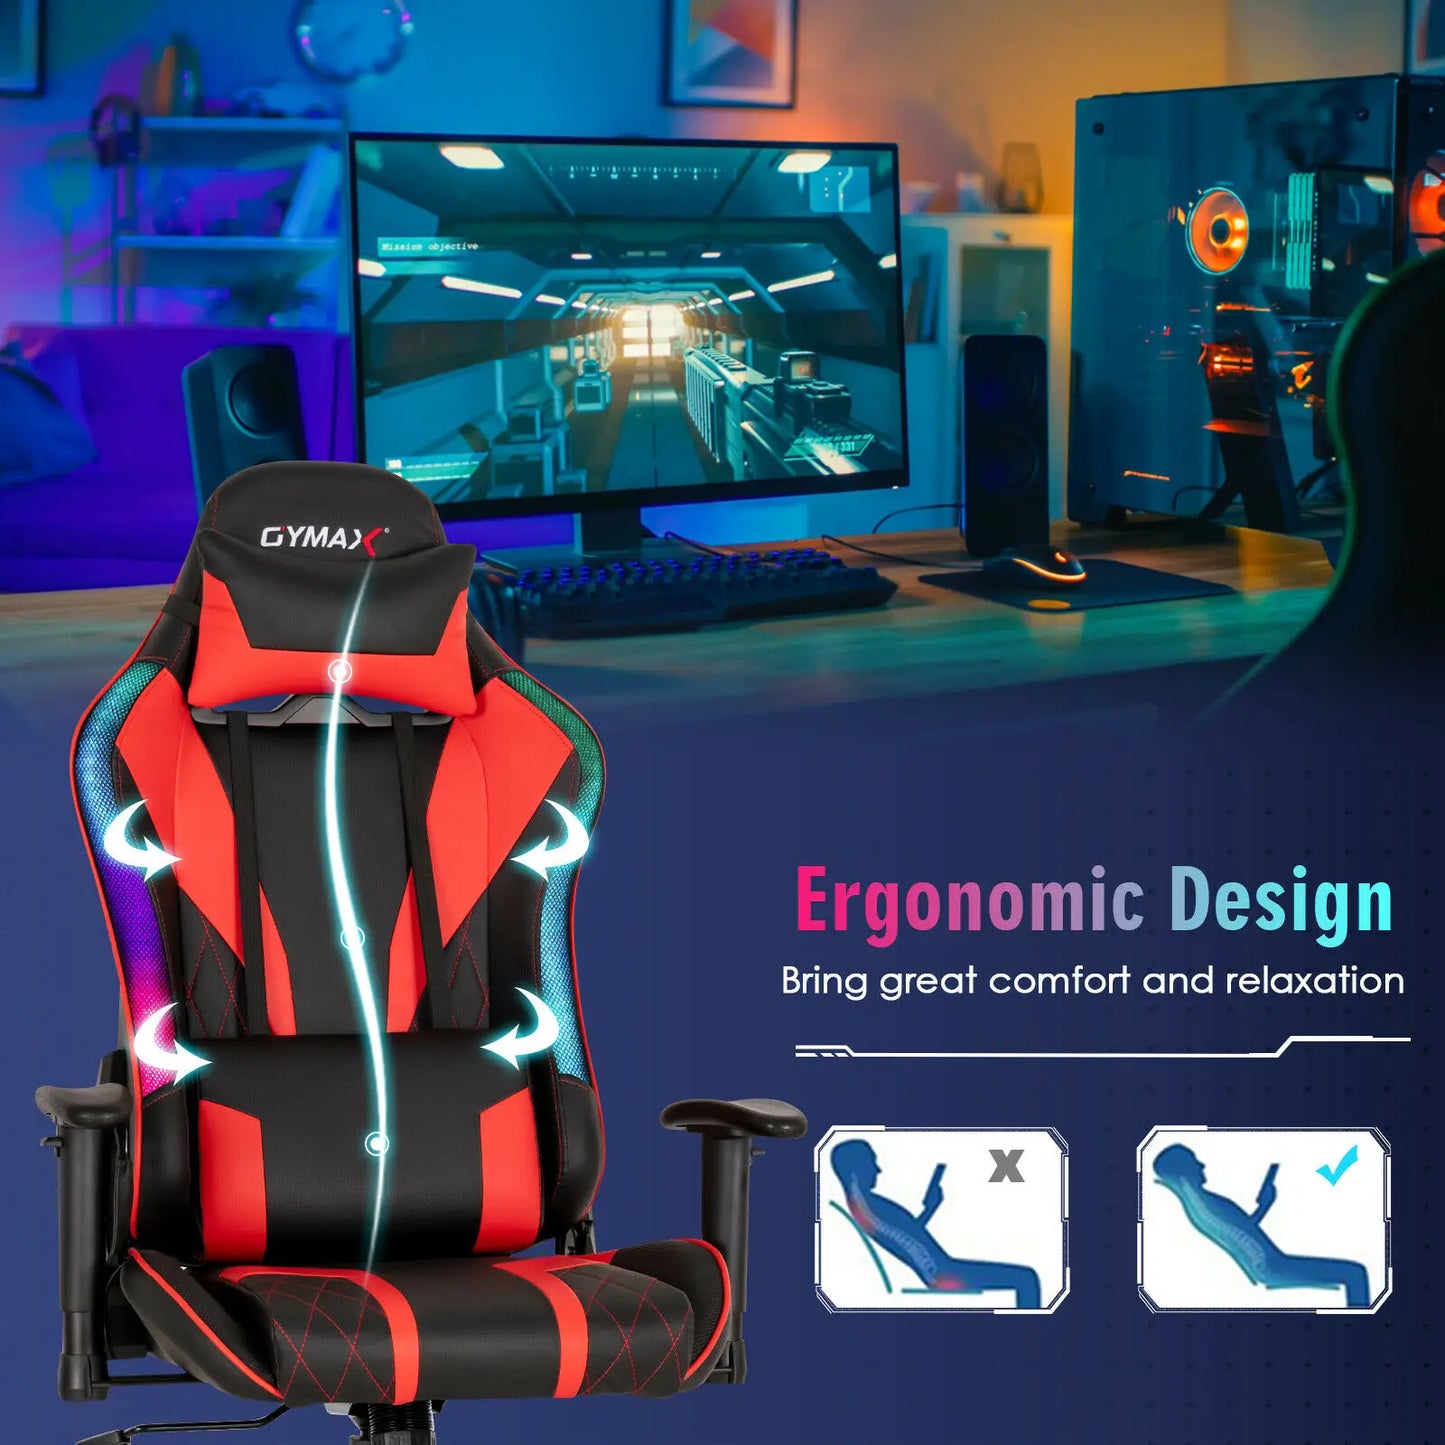 Costway Adjustable Gaming Chair with Dynamic LED Lights